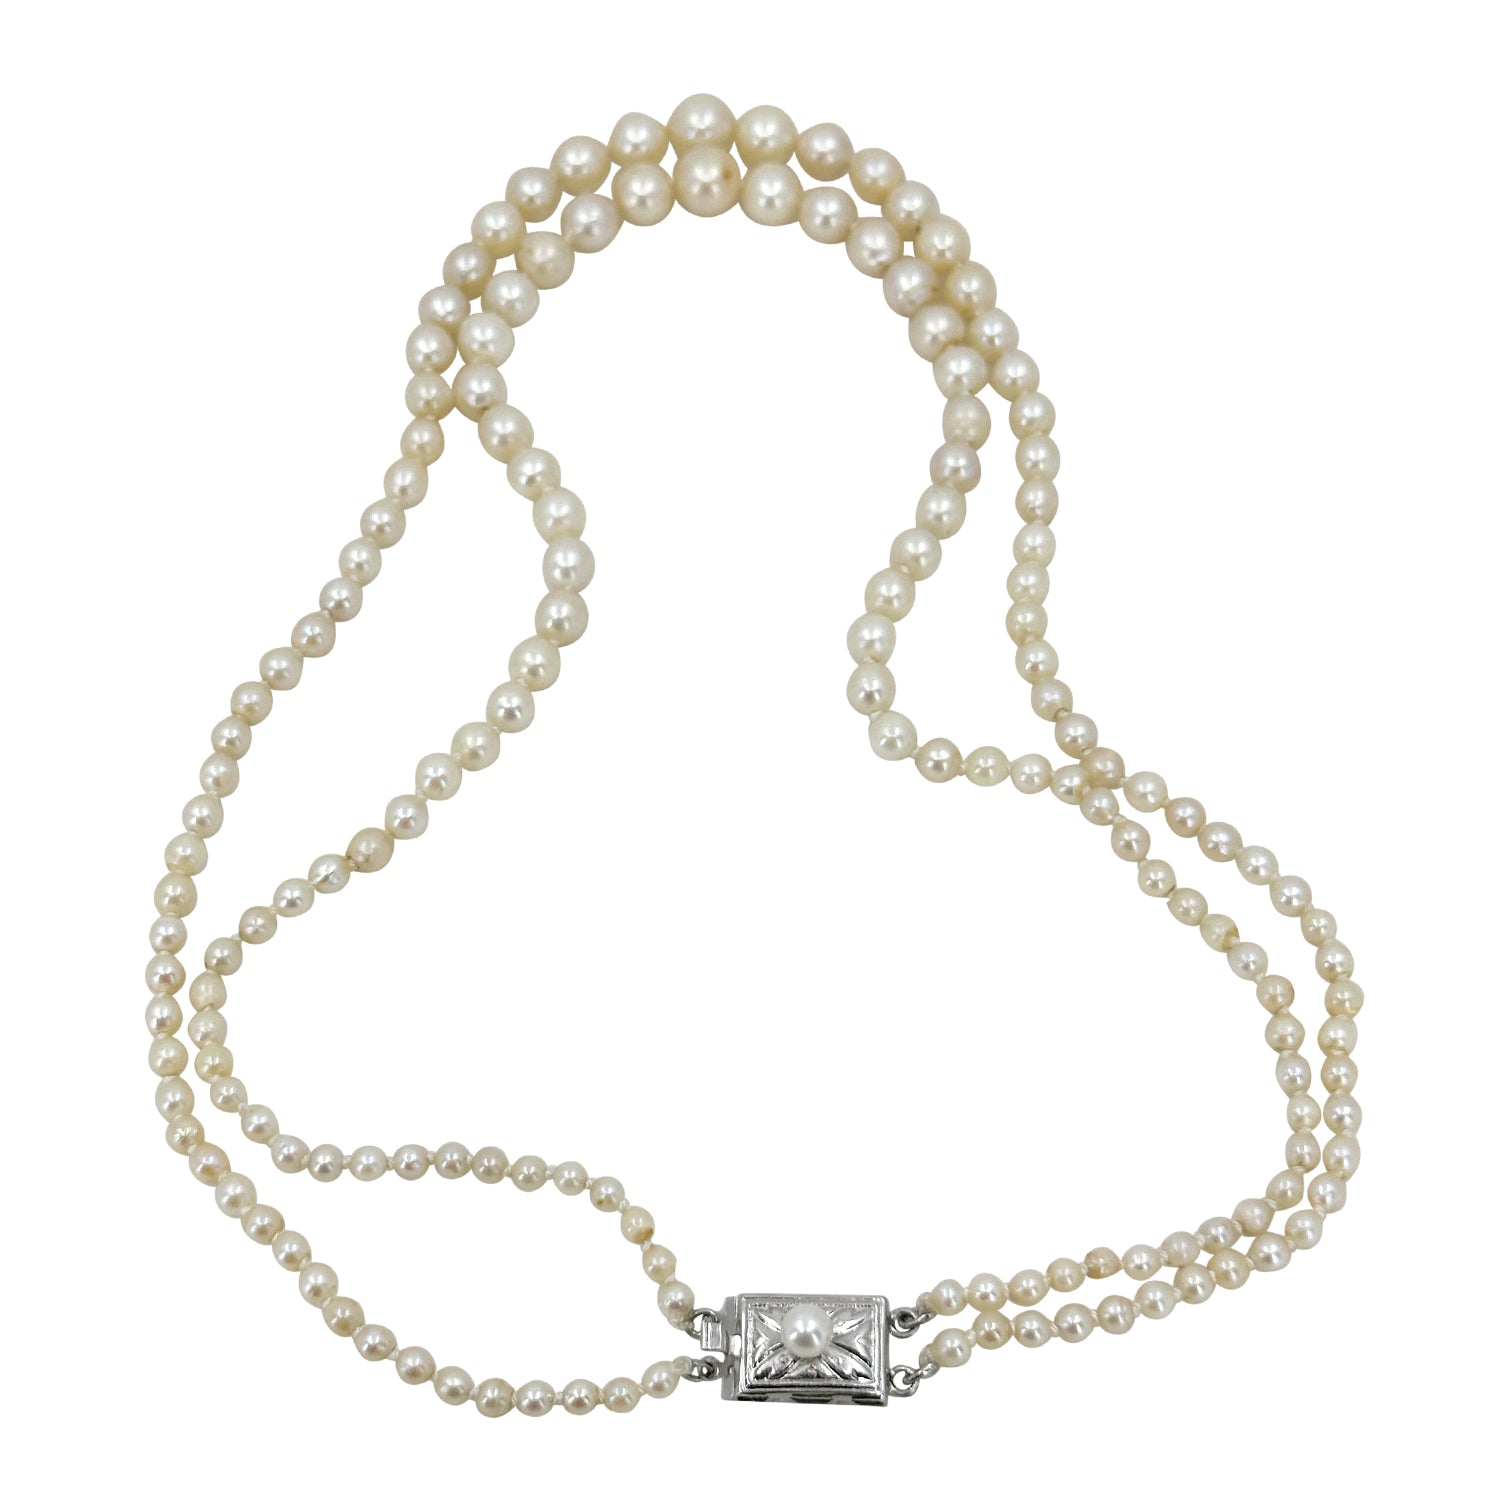 Mid Century Double Strand Graduated Japanese Saltwater Akoya Cultured Pearl Necklace -Sterling Silver 15.75 & 16.75 Inch